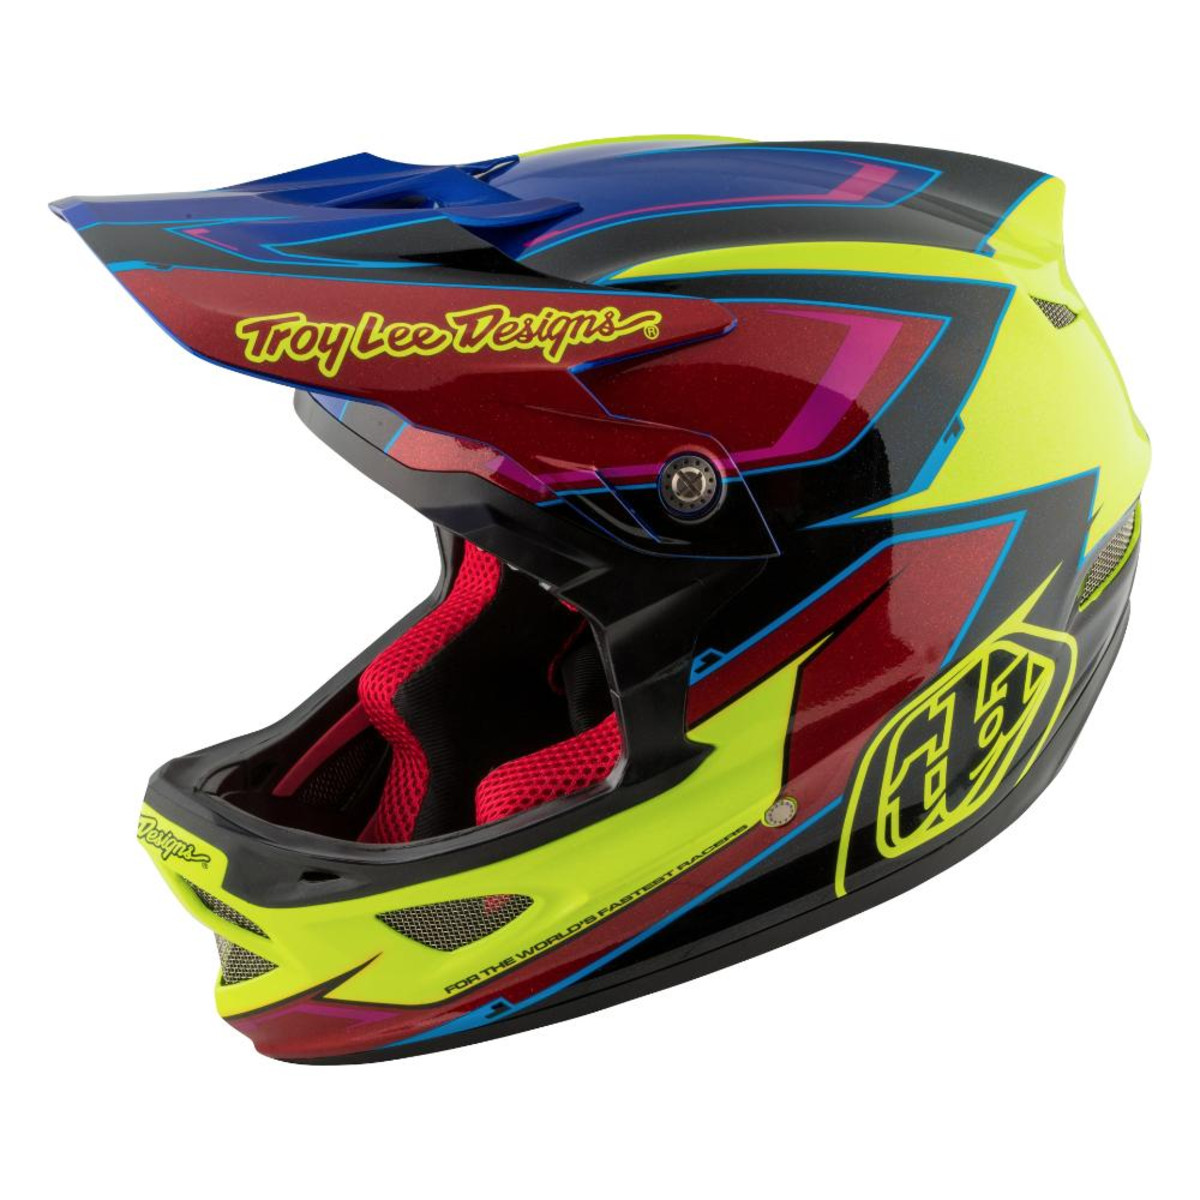 Troy Lee Designs Casque VTT Downhill D3 Cadence - Yellow/Red